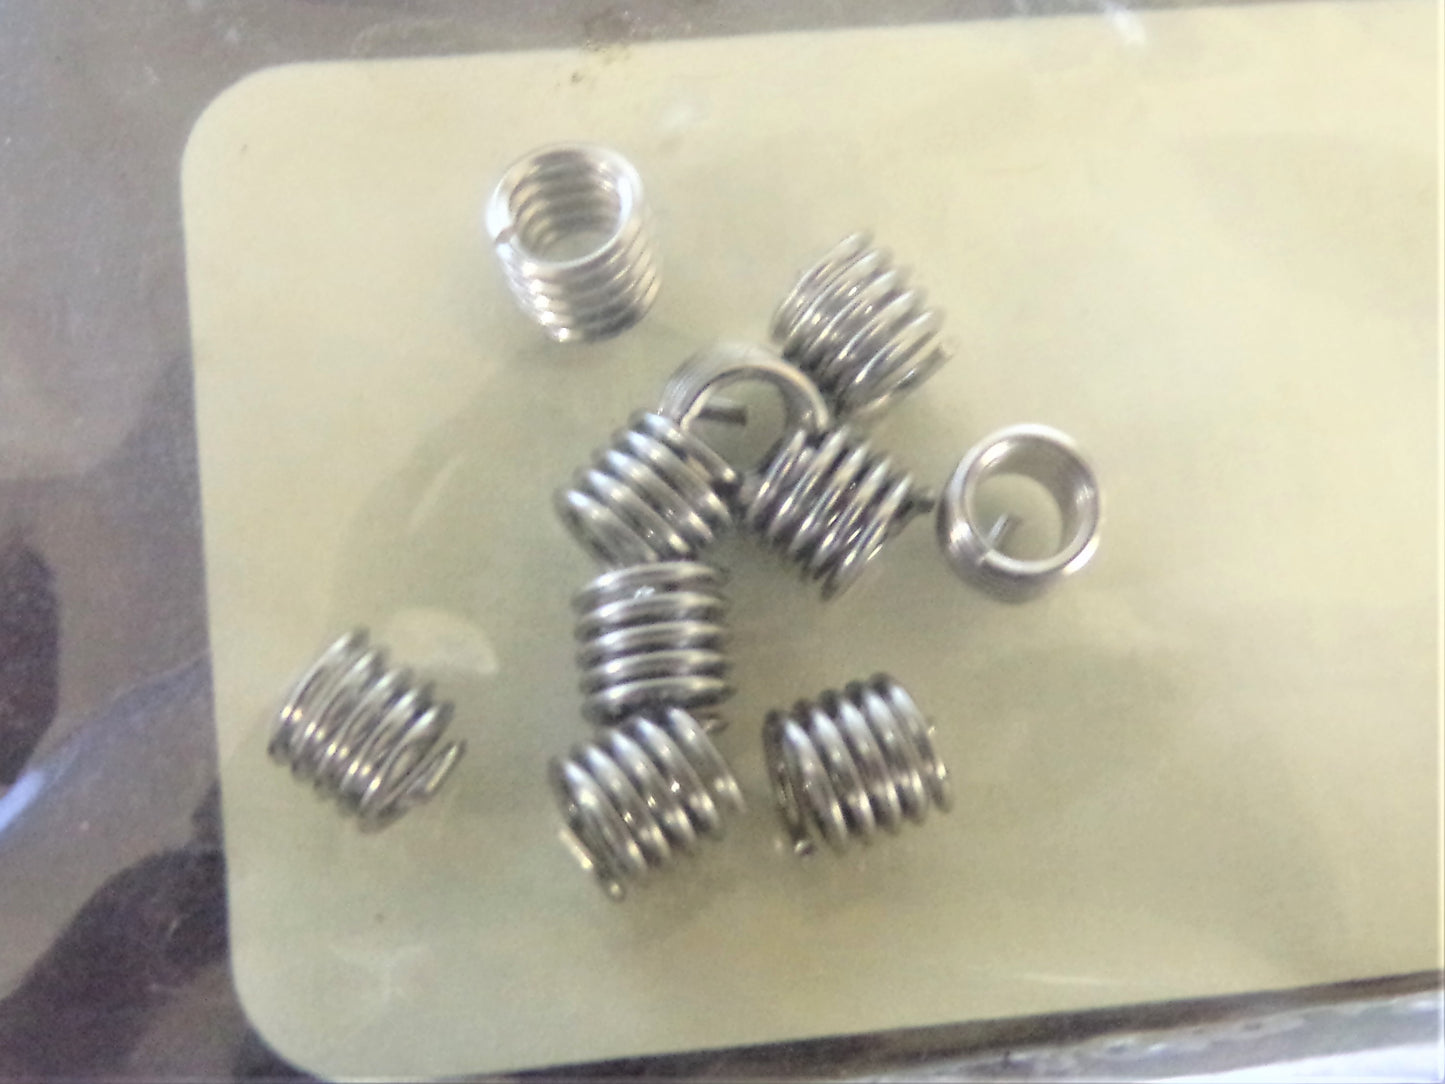 RECOIL Helical Insert, Free Running Helical, 18-8 Stainless Steel, 4-40 Internal Thread Size (CR00519-WTA14)